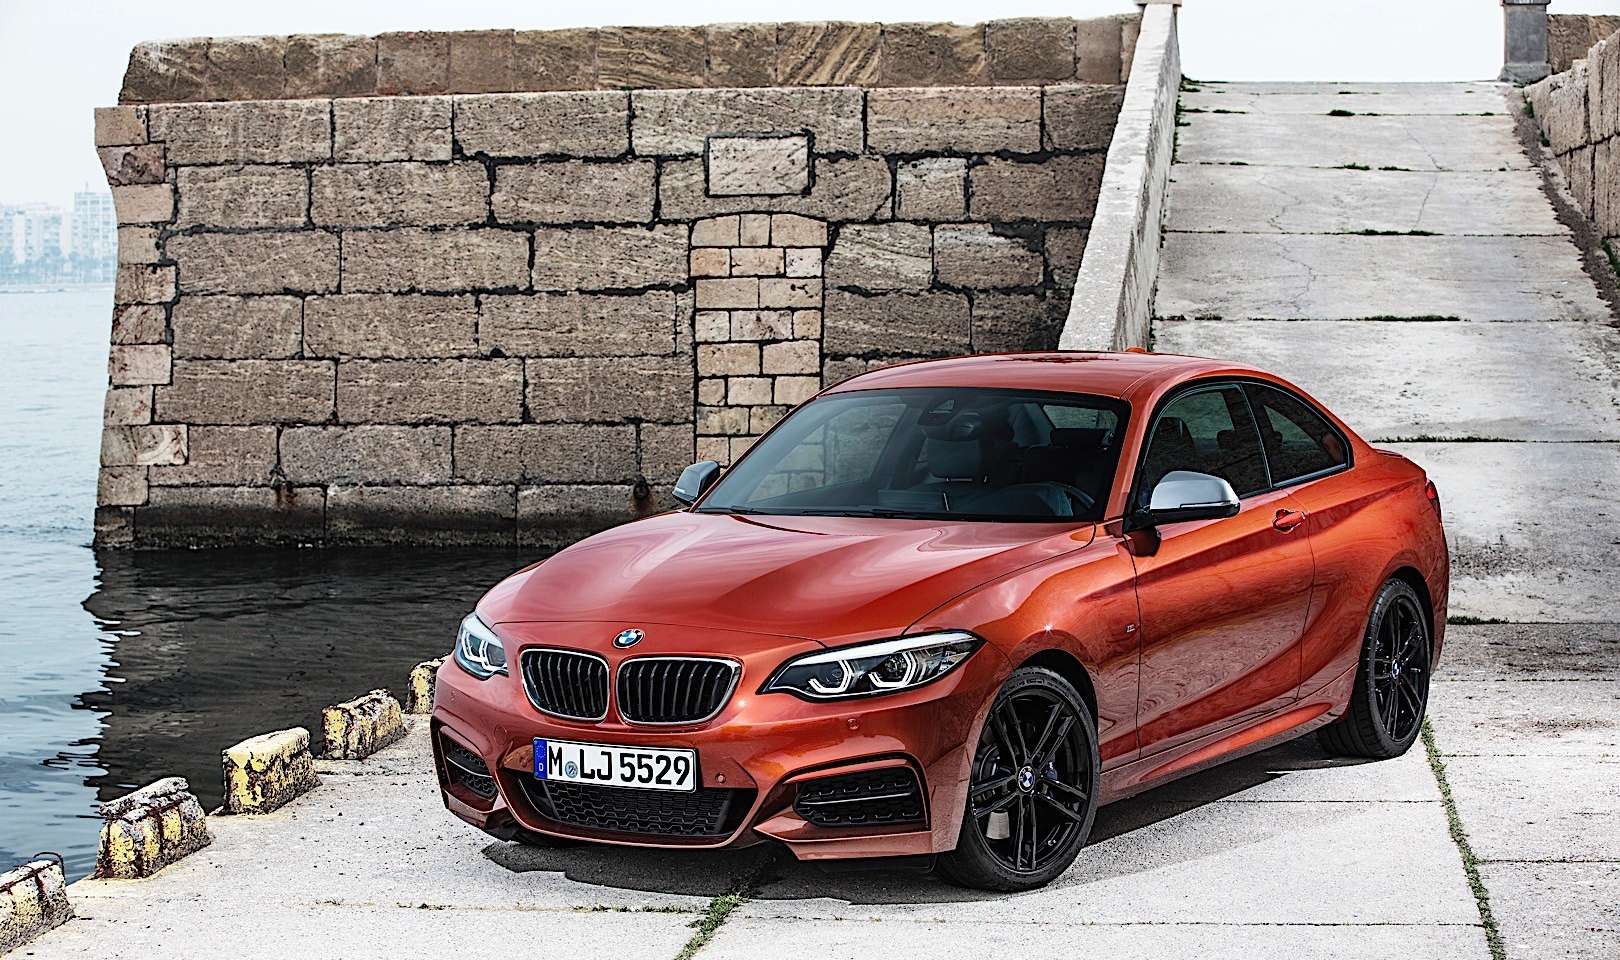 2017 BMW 2 Series Coupe M240i xDrive 060 Times, Top Speed